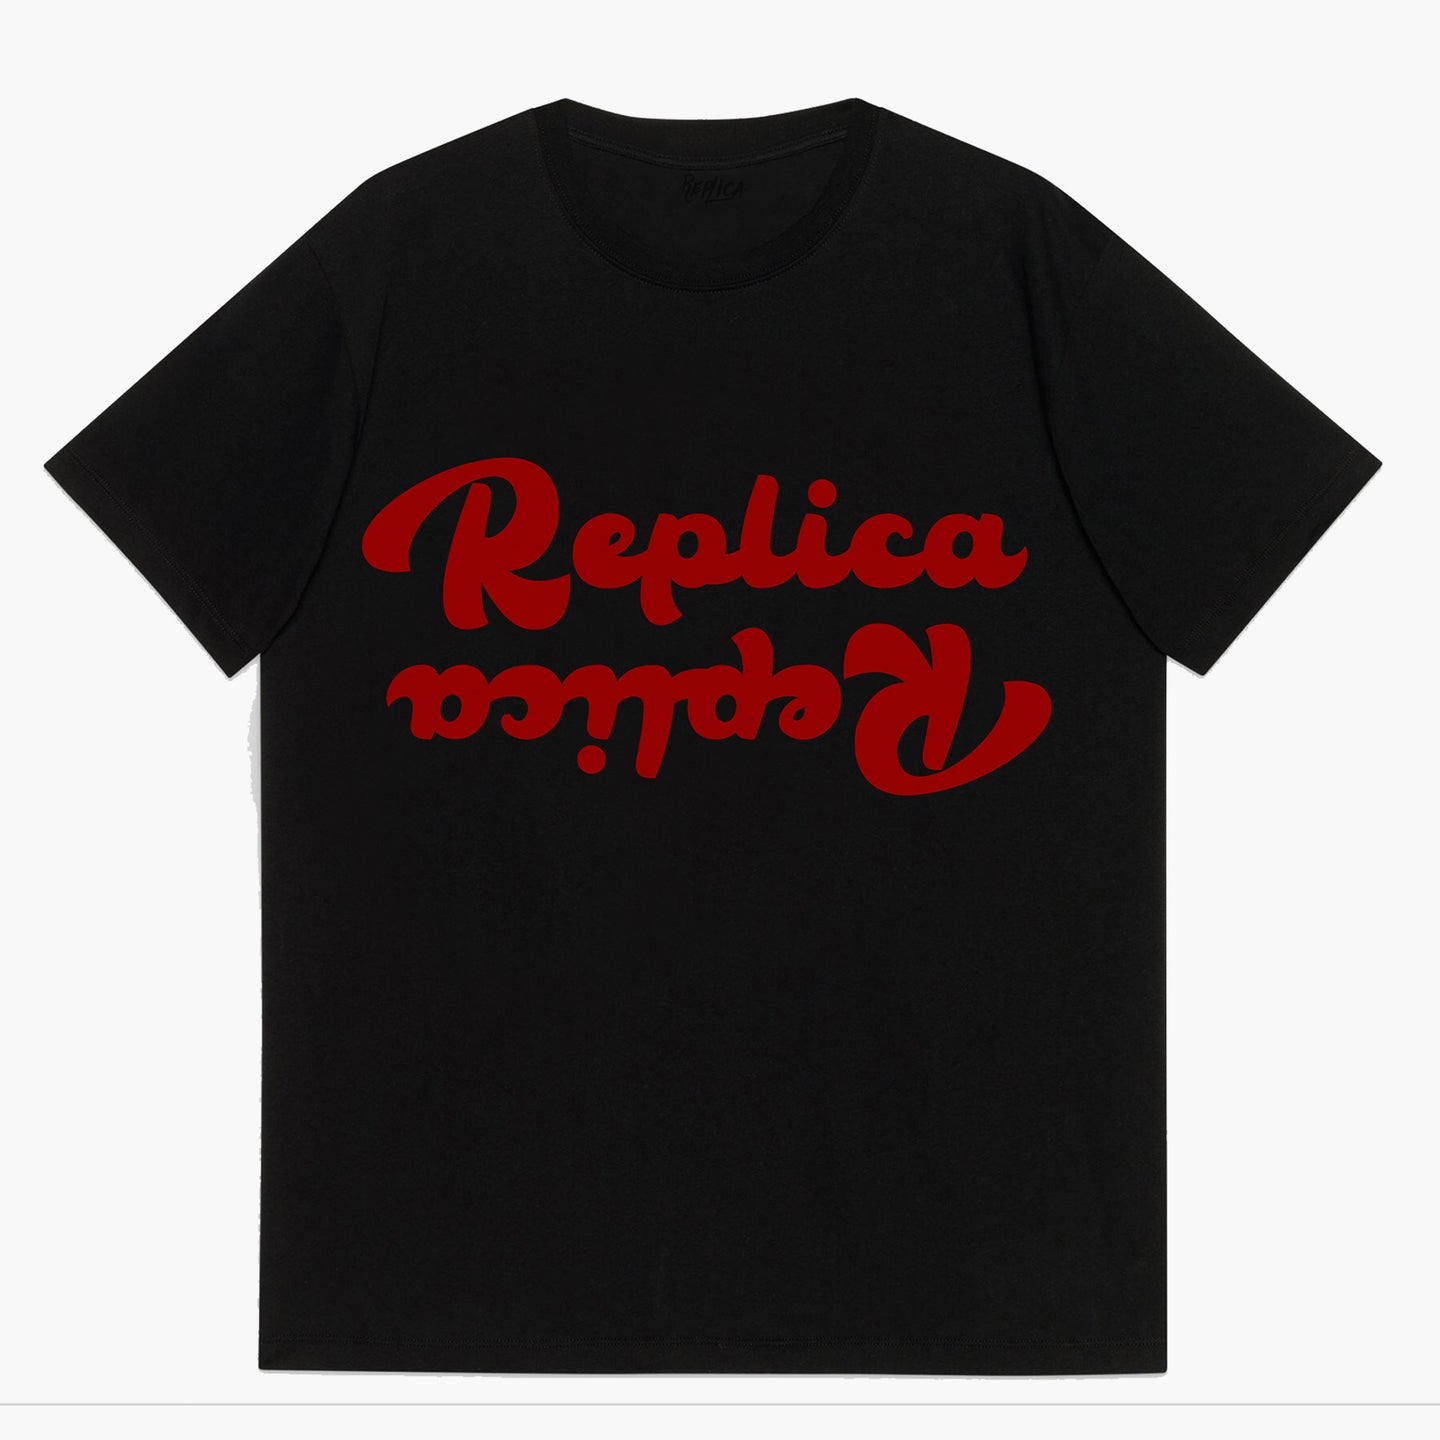 Replica What Goes Around, Comes Around T-shirts style